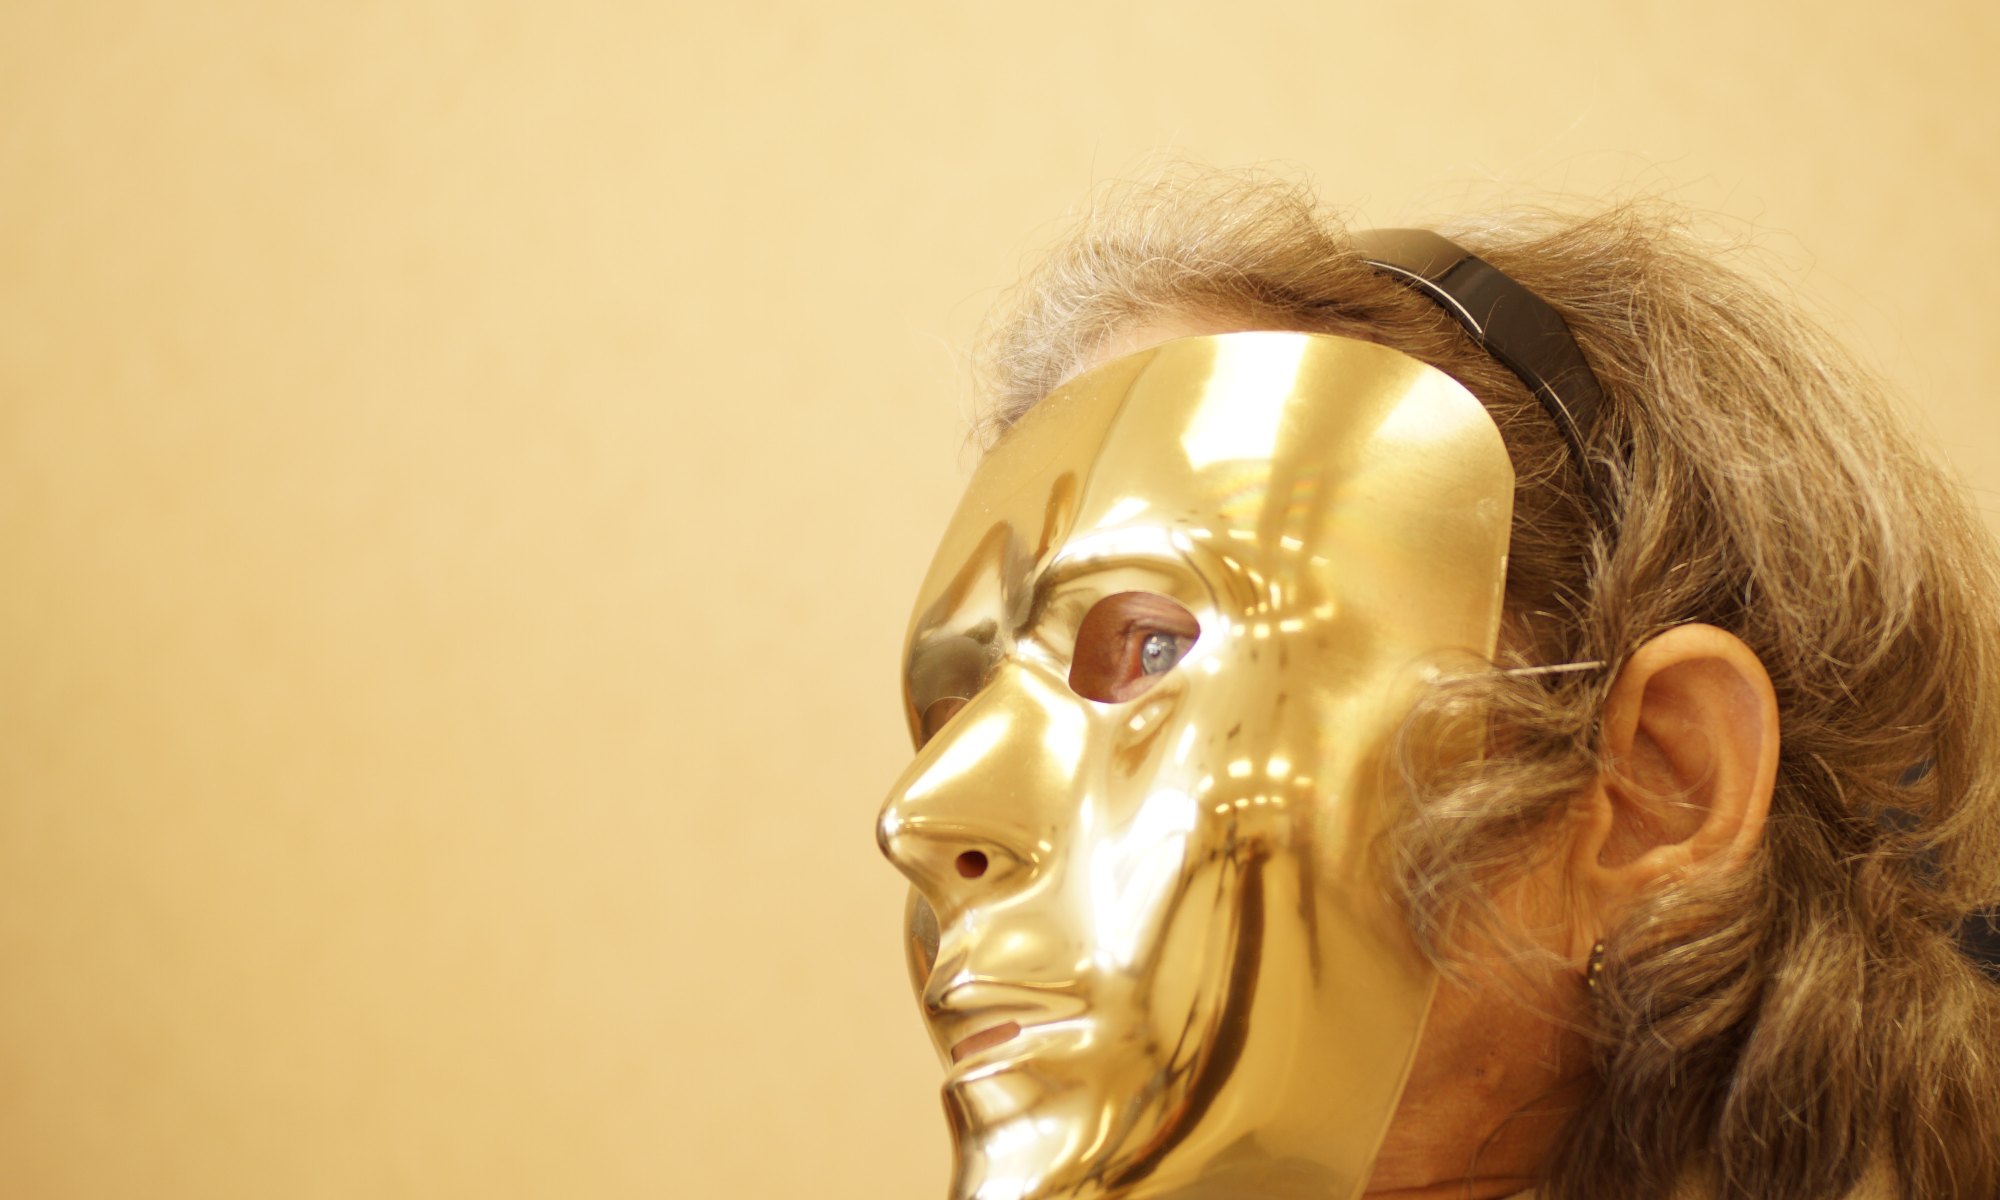 Person demonstrating theory of mind by wearing a gold mask